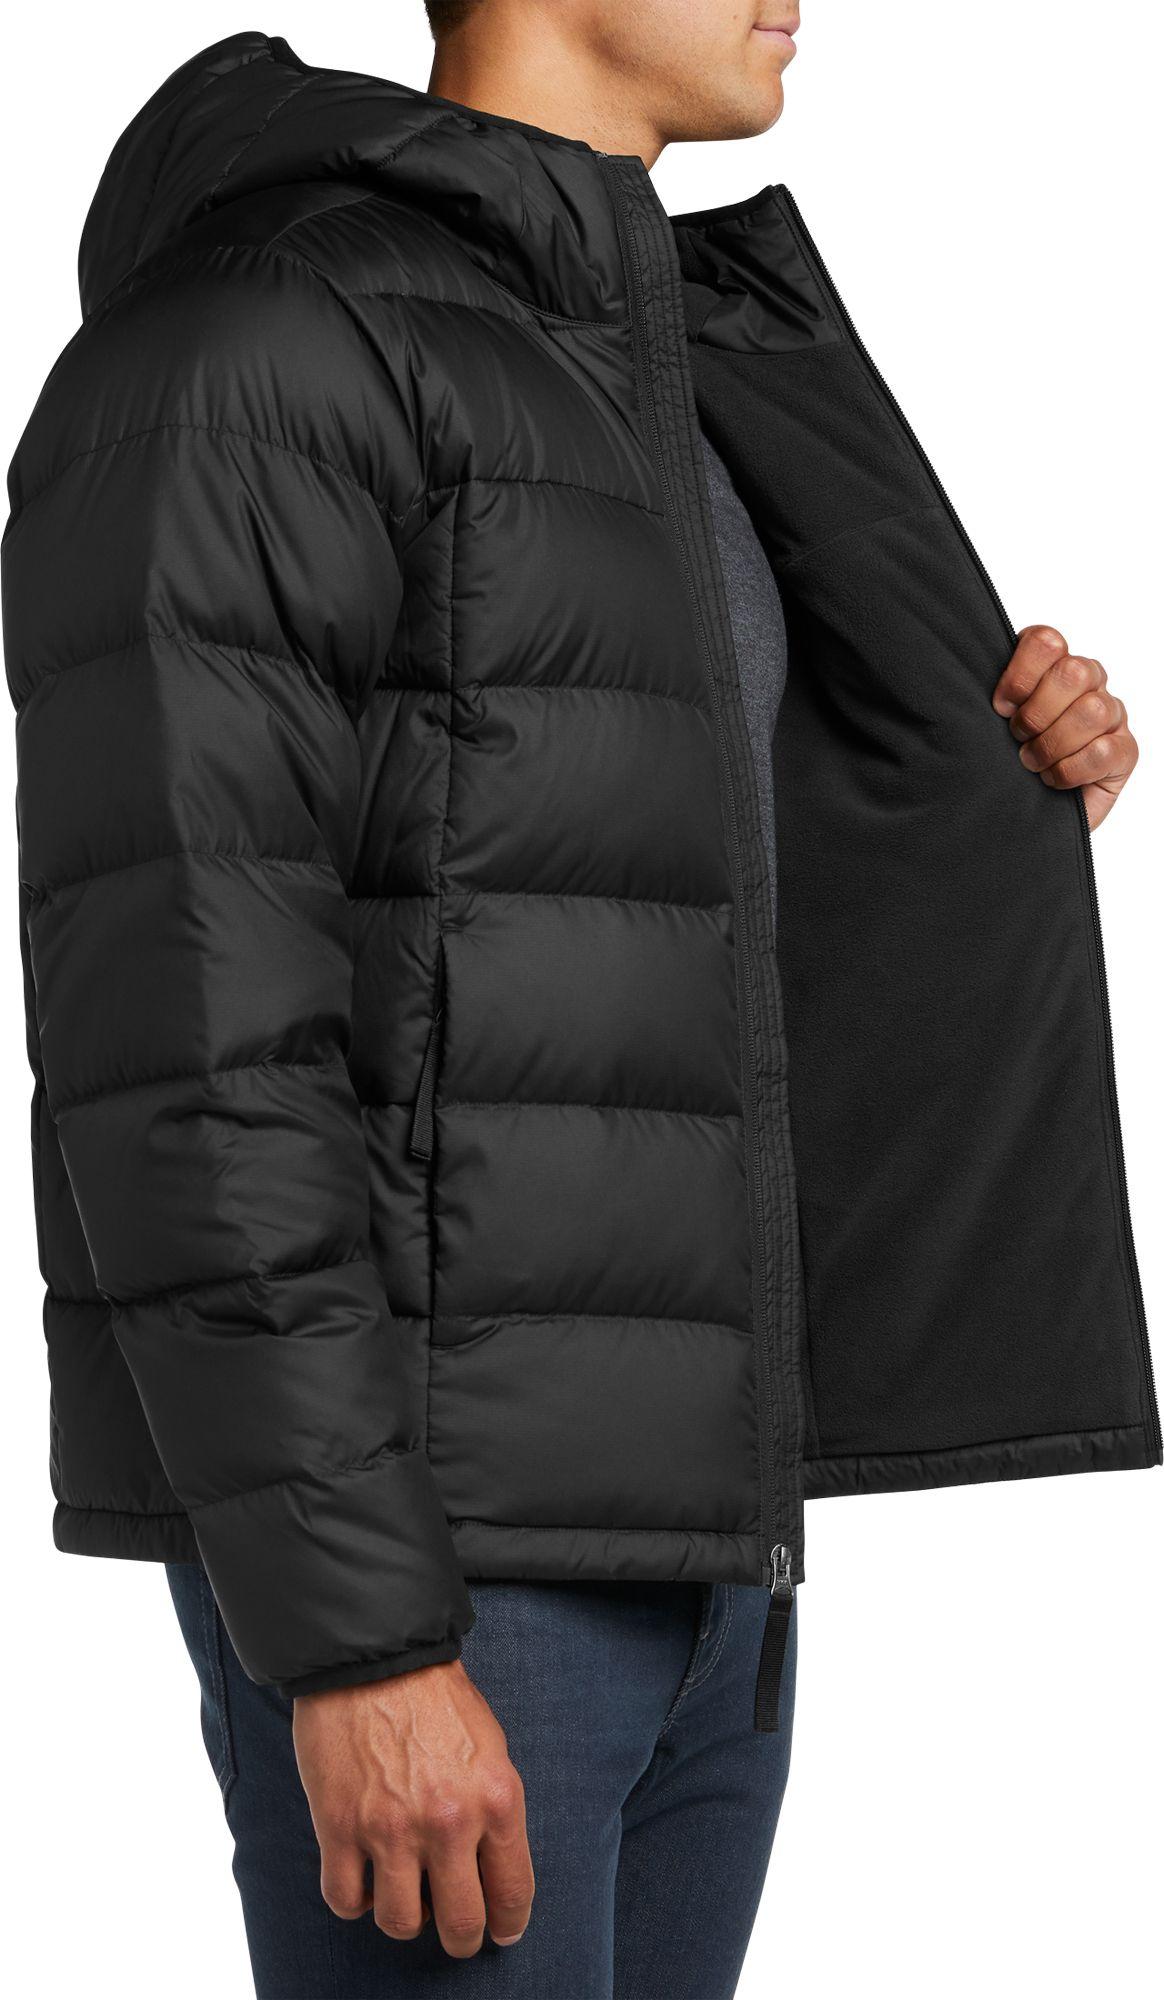 The North Face Alpz Luxe Winter Jacket in Black for Men - Lyst